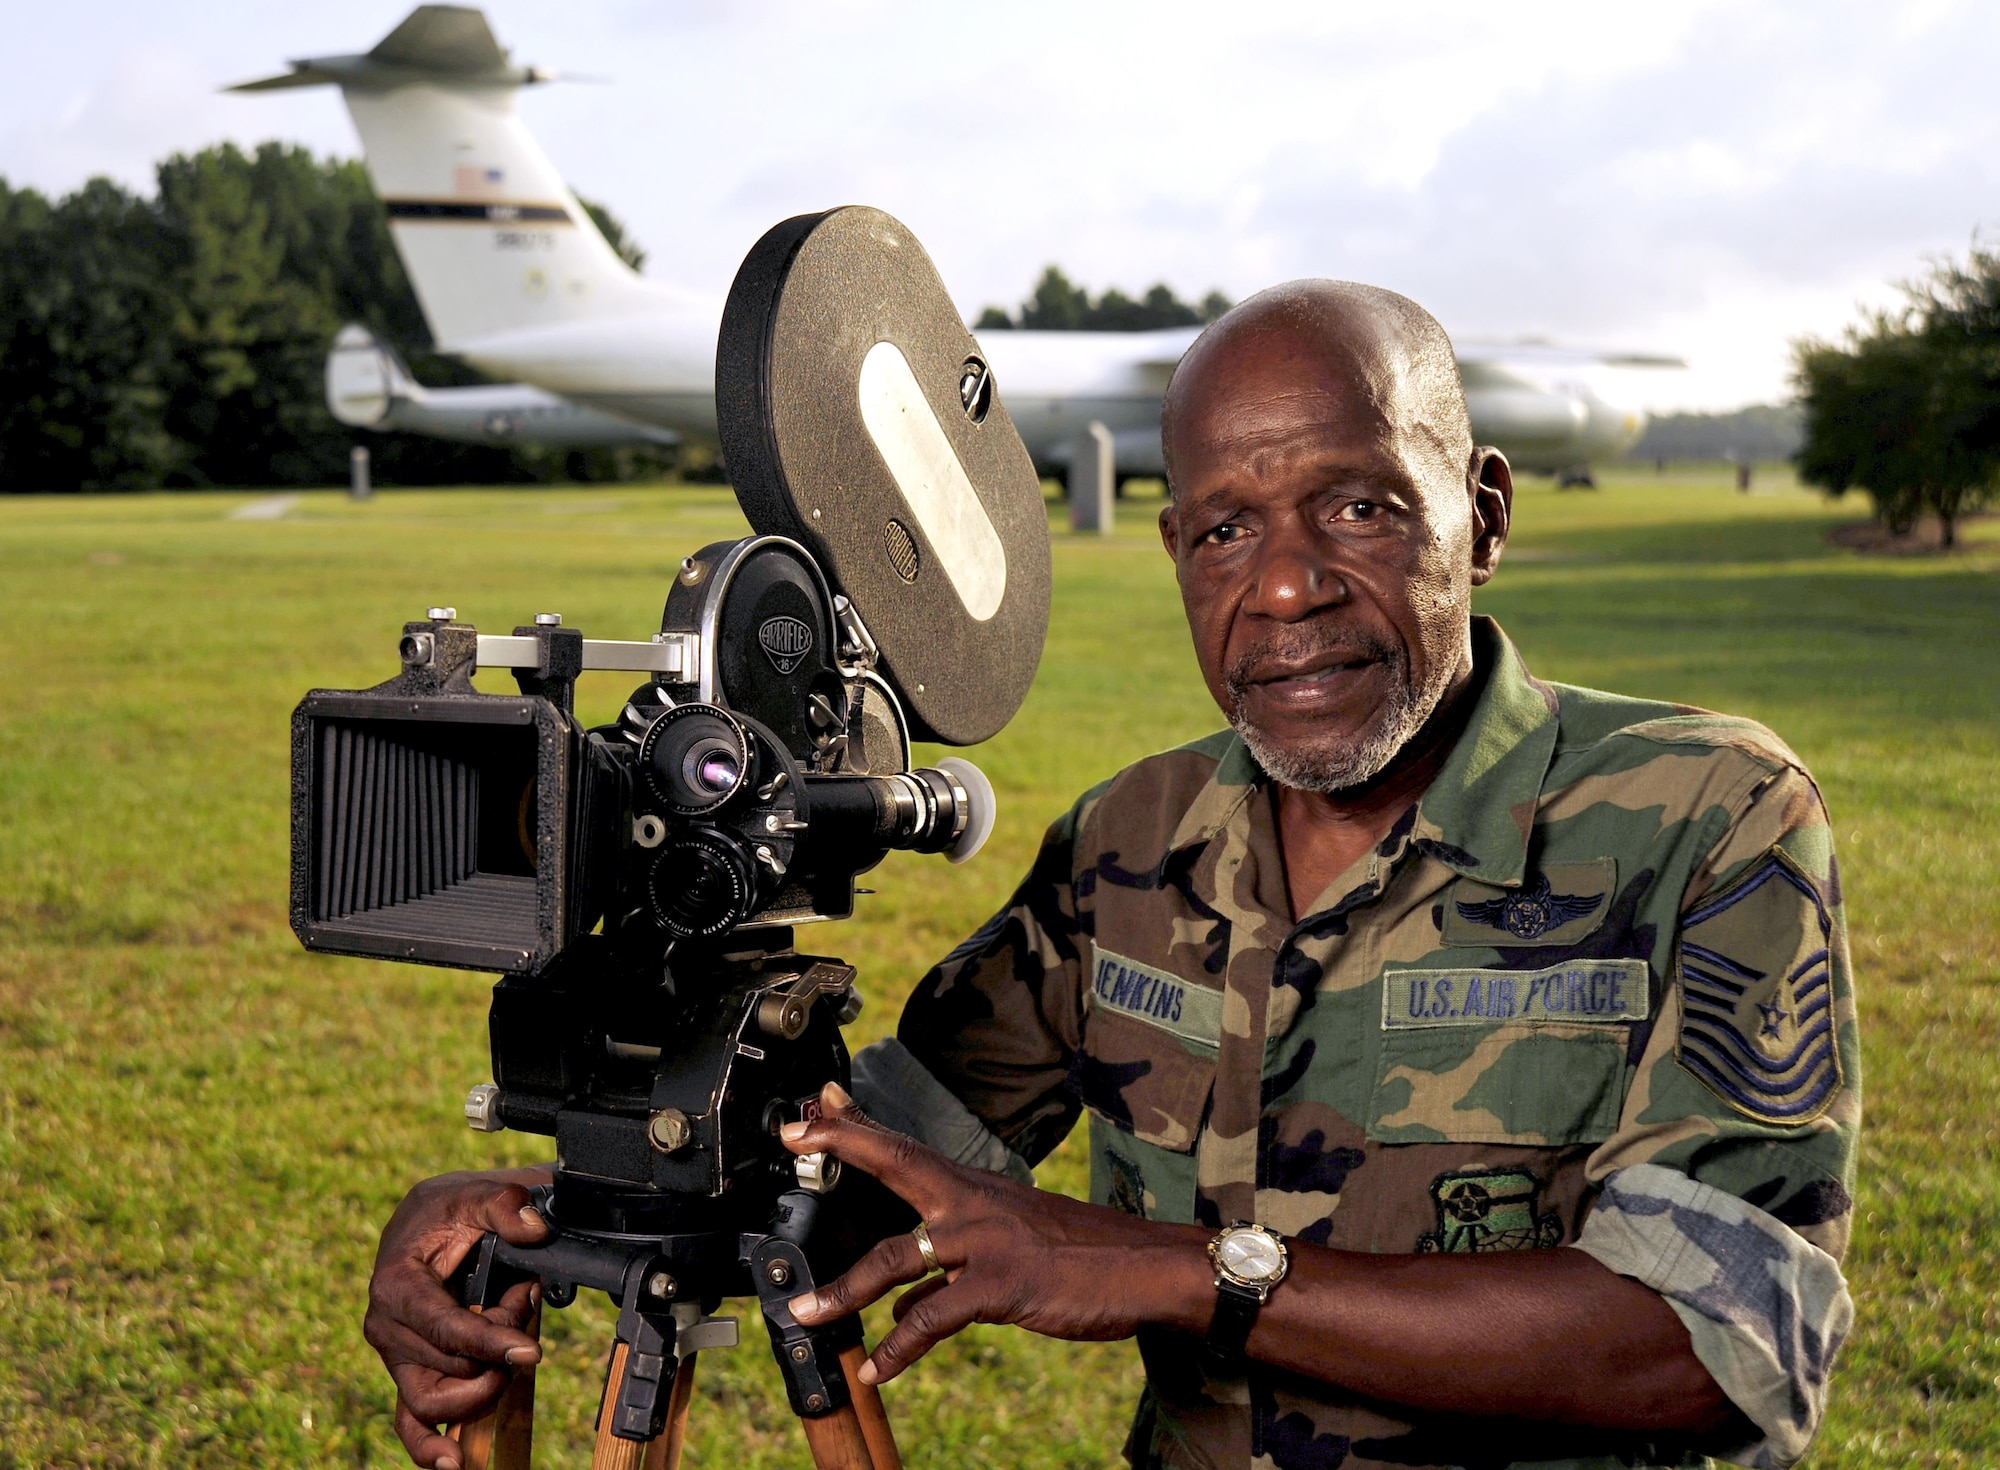 U.S. Air Force Ret. SMSgt (Ret) Mitchell Jenkins, Resource Management Officer, 1st Combat Camera Squadron served as a combat videographer from 10 Oct 68 to 1 Aug 89.  During his military career served two tours of duty in Southeast Asia as an aerial and ground combat documentation cameraman.  He flew over 100 combat missions in some 10 different air frames.  As an E-4, he was awarded the Distinguish Flying Gross, (4) Air Medals, and the Outstanding Unit Citation with “V” device.  Sgt Jenkins’ primary duty was Battle Damage Assessment (BDA) photographer with the 16th Special Operations Squadron onboard a C-130 Gunship, (SPECTRE).  His secondary duties included alert photographer for air rescue missions onboard H-53 (Jolly Green Giant) helicopters.  He also flew countless Forward Air Control (FAC) missions on OV-10 aircrafts, and air strike mission on F-100 Sabers, and F-4 Phantom fighters.  In addition, he flew many C-130 re-supply missions, and Army UH-1 medical evacuation missions throughout Vietnam.  He even voluntarily flew a few Air America missions to capture the actions of US forces in Southeast Asia.  Mr. Jenkins also flew over flew over 5,000 hours in various aircraft and he participated in many operational and humanitarian missions, one major event he documented in was in 1983, Operation UGENT FURY where film was the last time used during a mission. (U.S. Air Force Photo/ Staff Sgt. Angelita M. Lawrence)(released)
